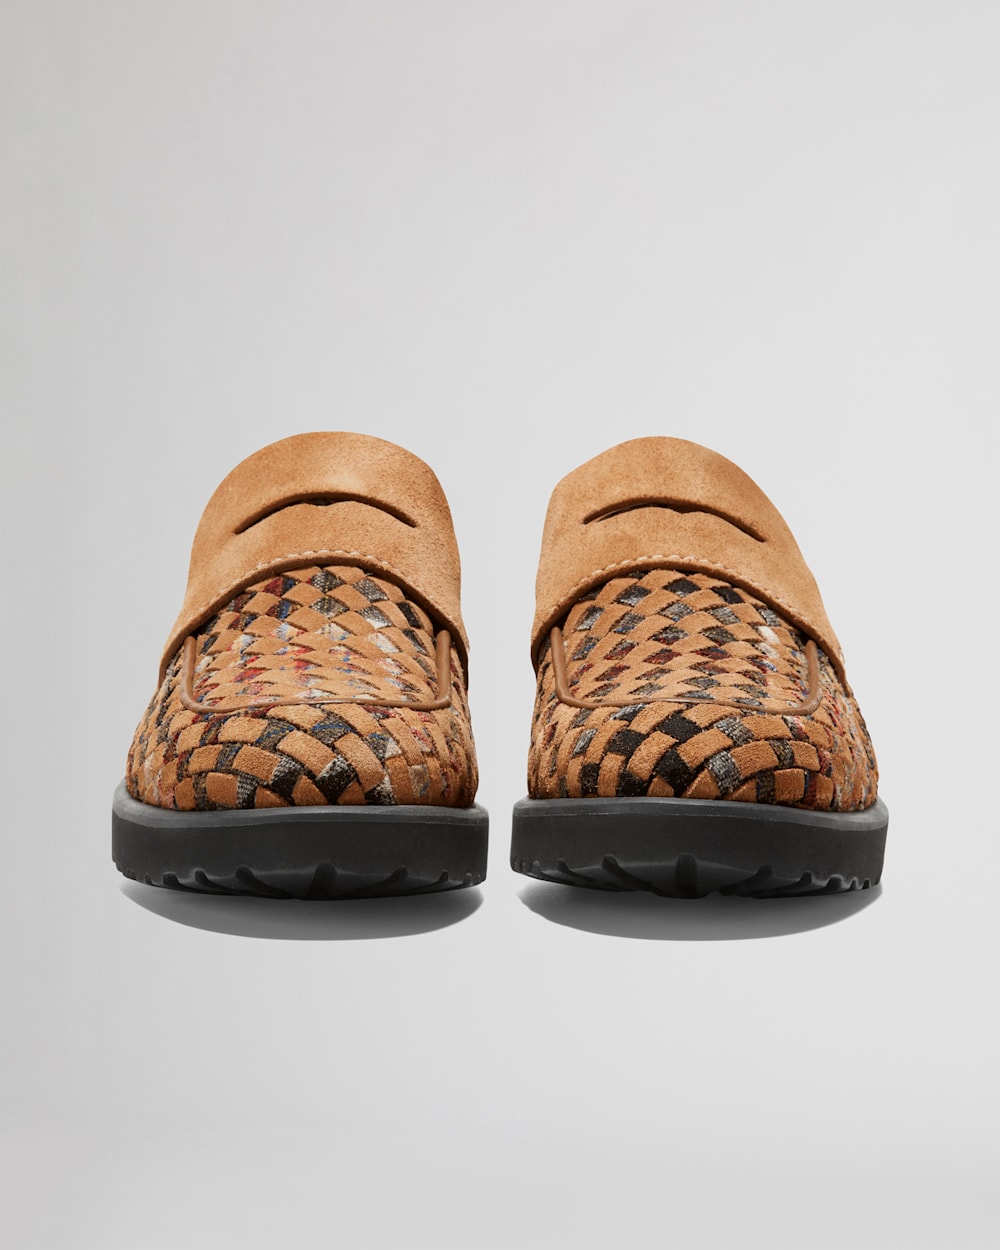 ALTERNATE VIEW OF COLE HAAN X PENDLETON WOMEN'S GENEVA PENNY LOAFERS IN ACADIA PLAID image number 2